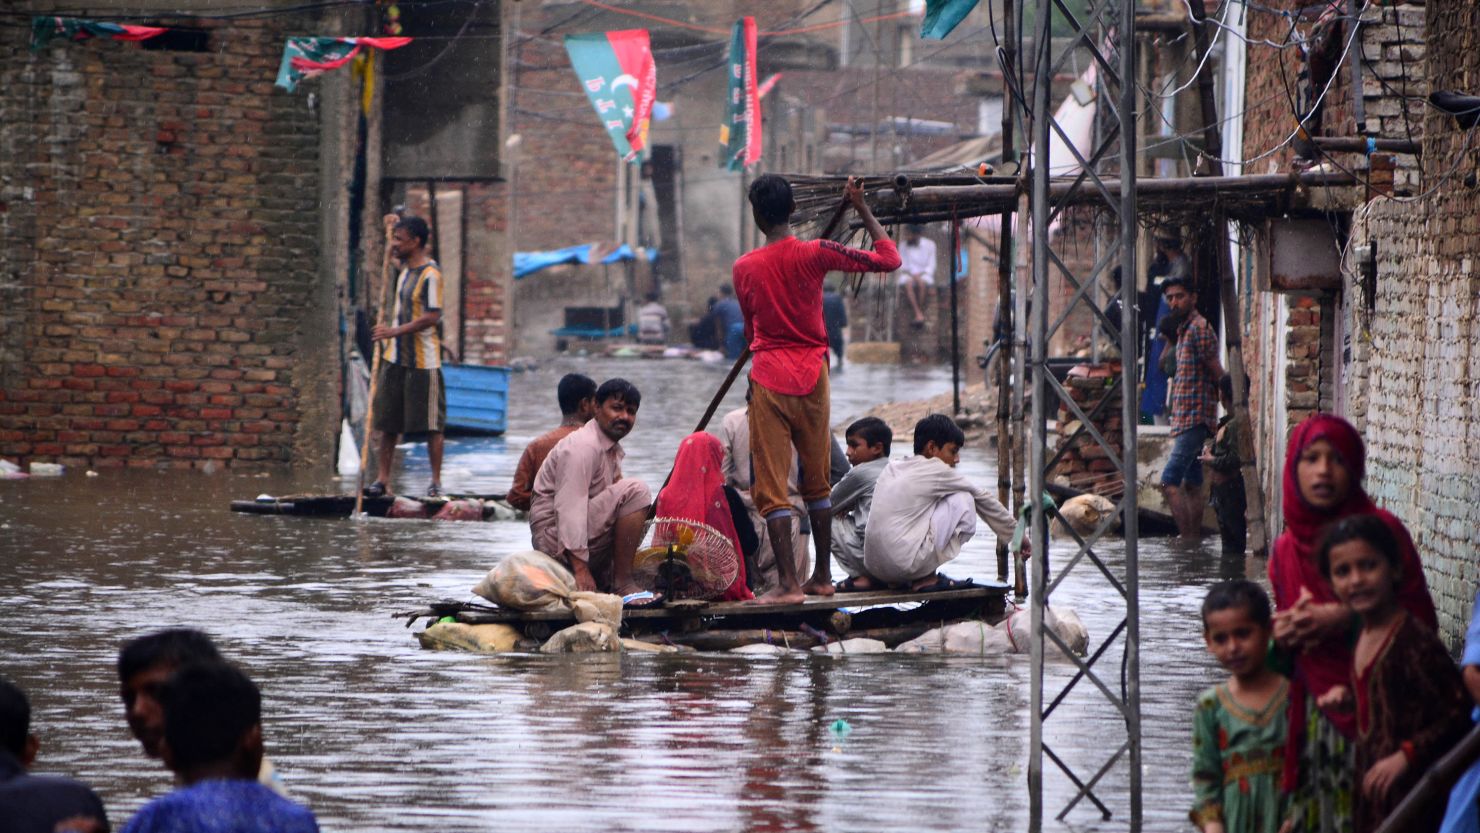 Residents use a raft to move along a waterlogged street in a residential area after a heavy monsoon rainfall in Hyderabad City, Pakistan, on August 19, 2022.